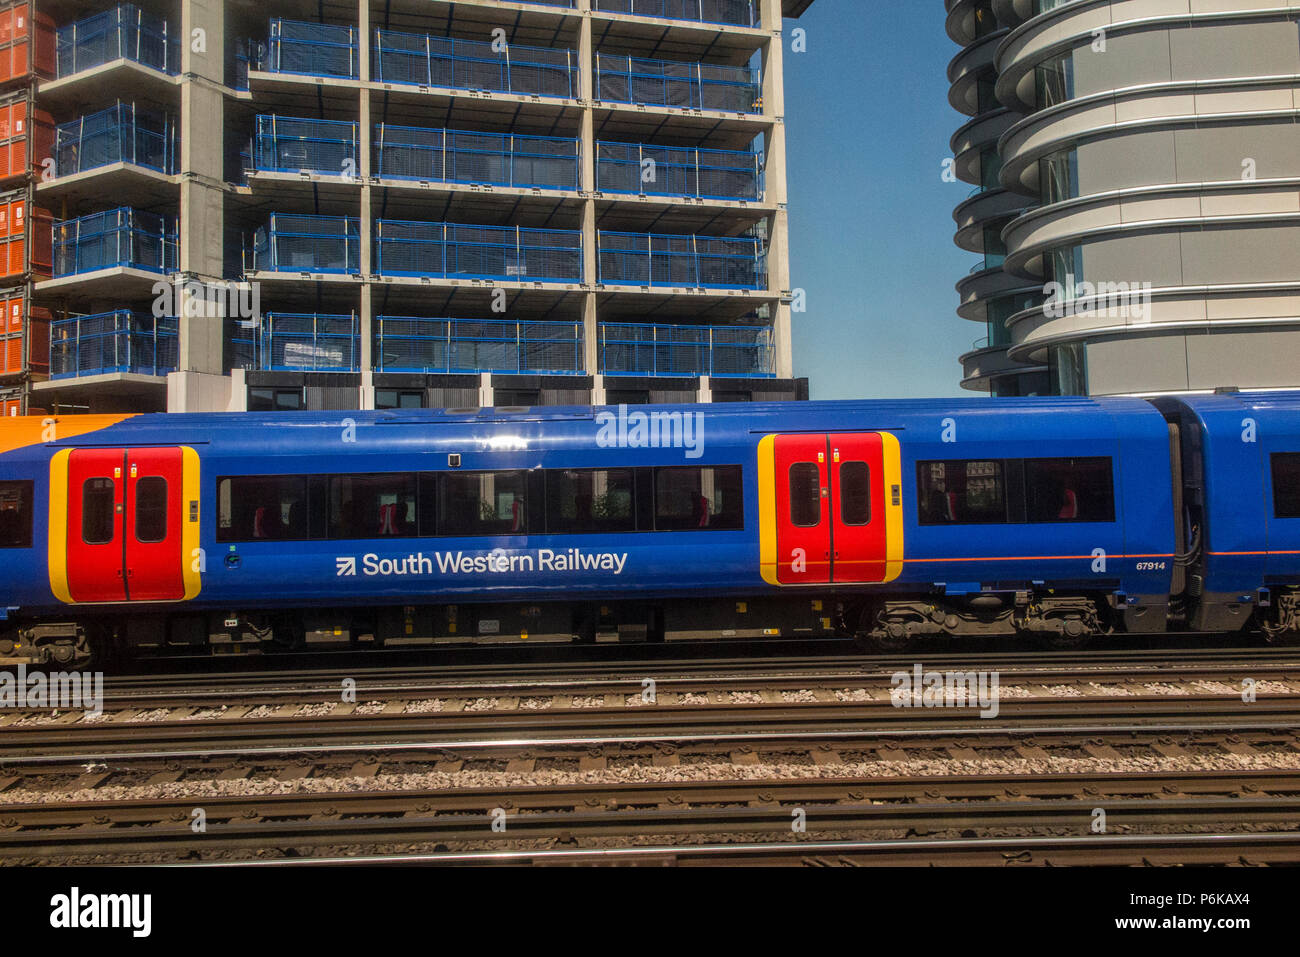 A South Western Railway train leaves London Waterloo station on its way to the suburbs of London Stock Photo